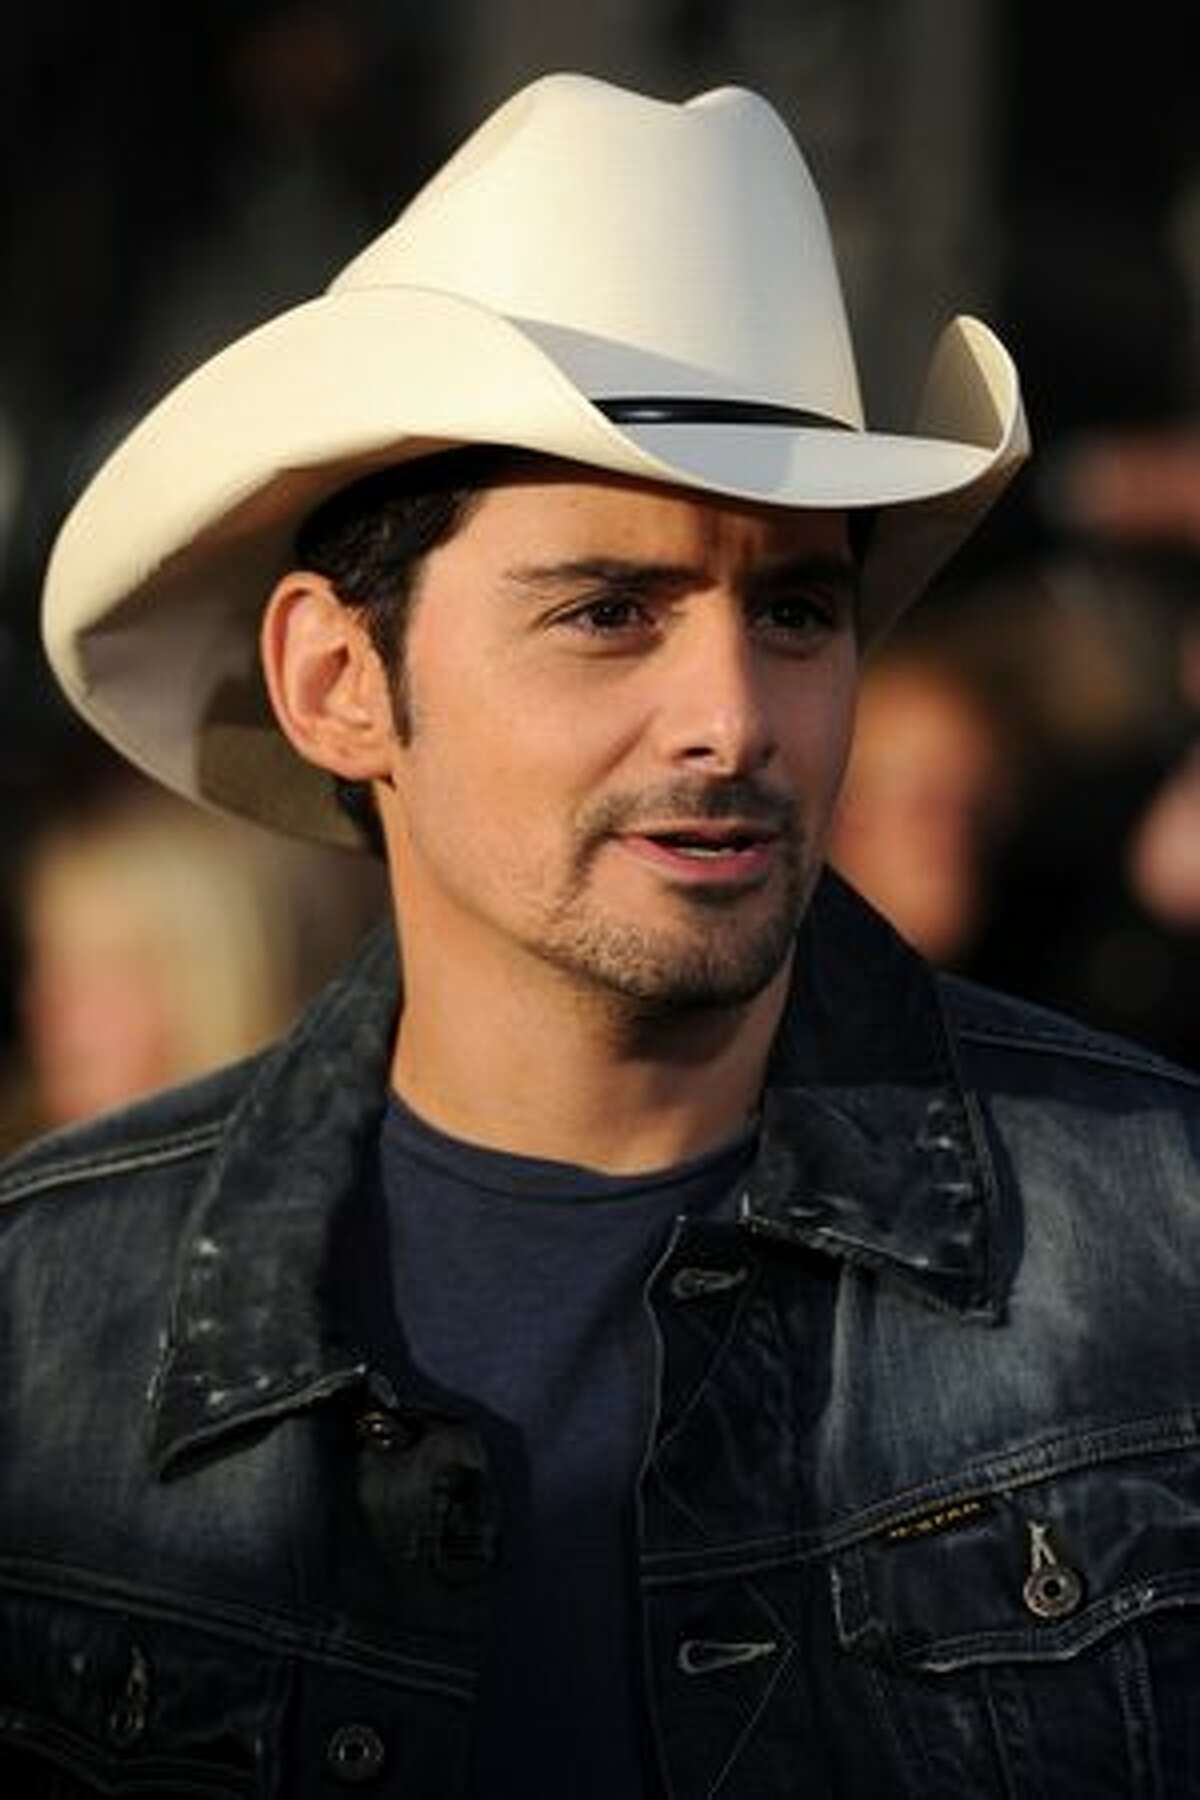 Musician Brad Paisley appears on ABC's Good Morning America at Bridgestone Arena on Wednesday in Nashville, Tennessee.